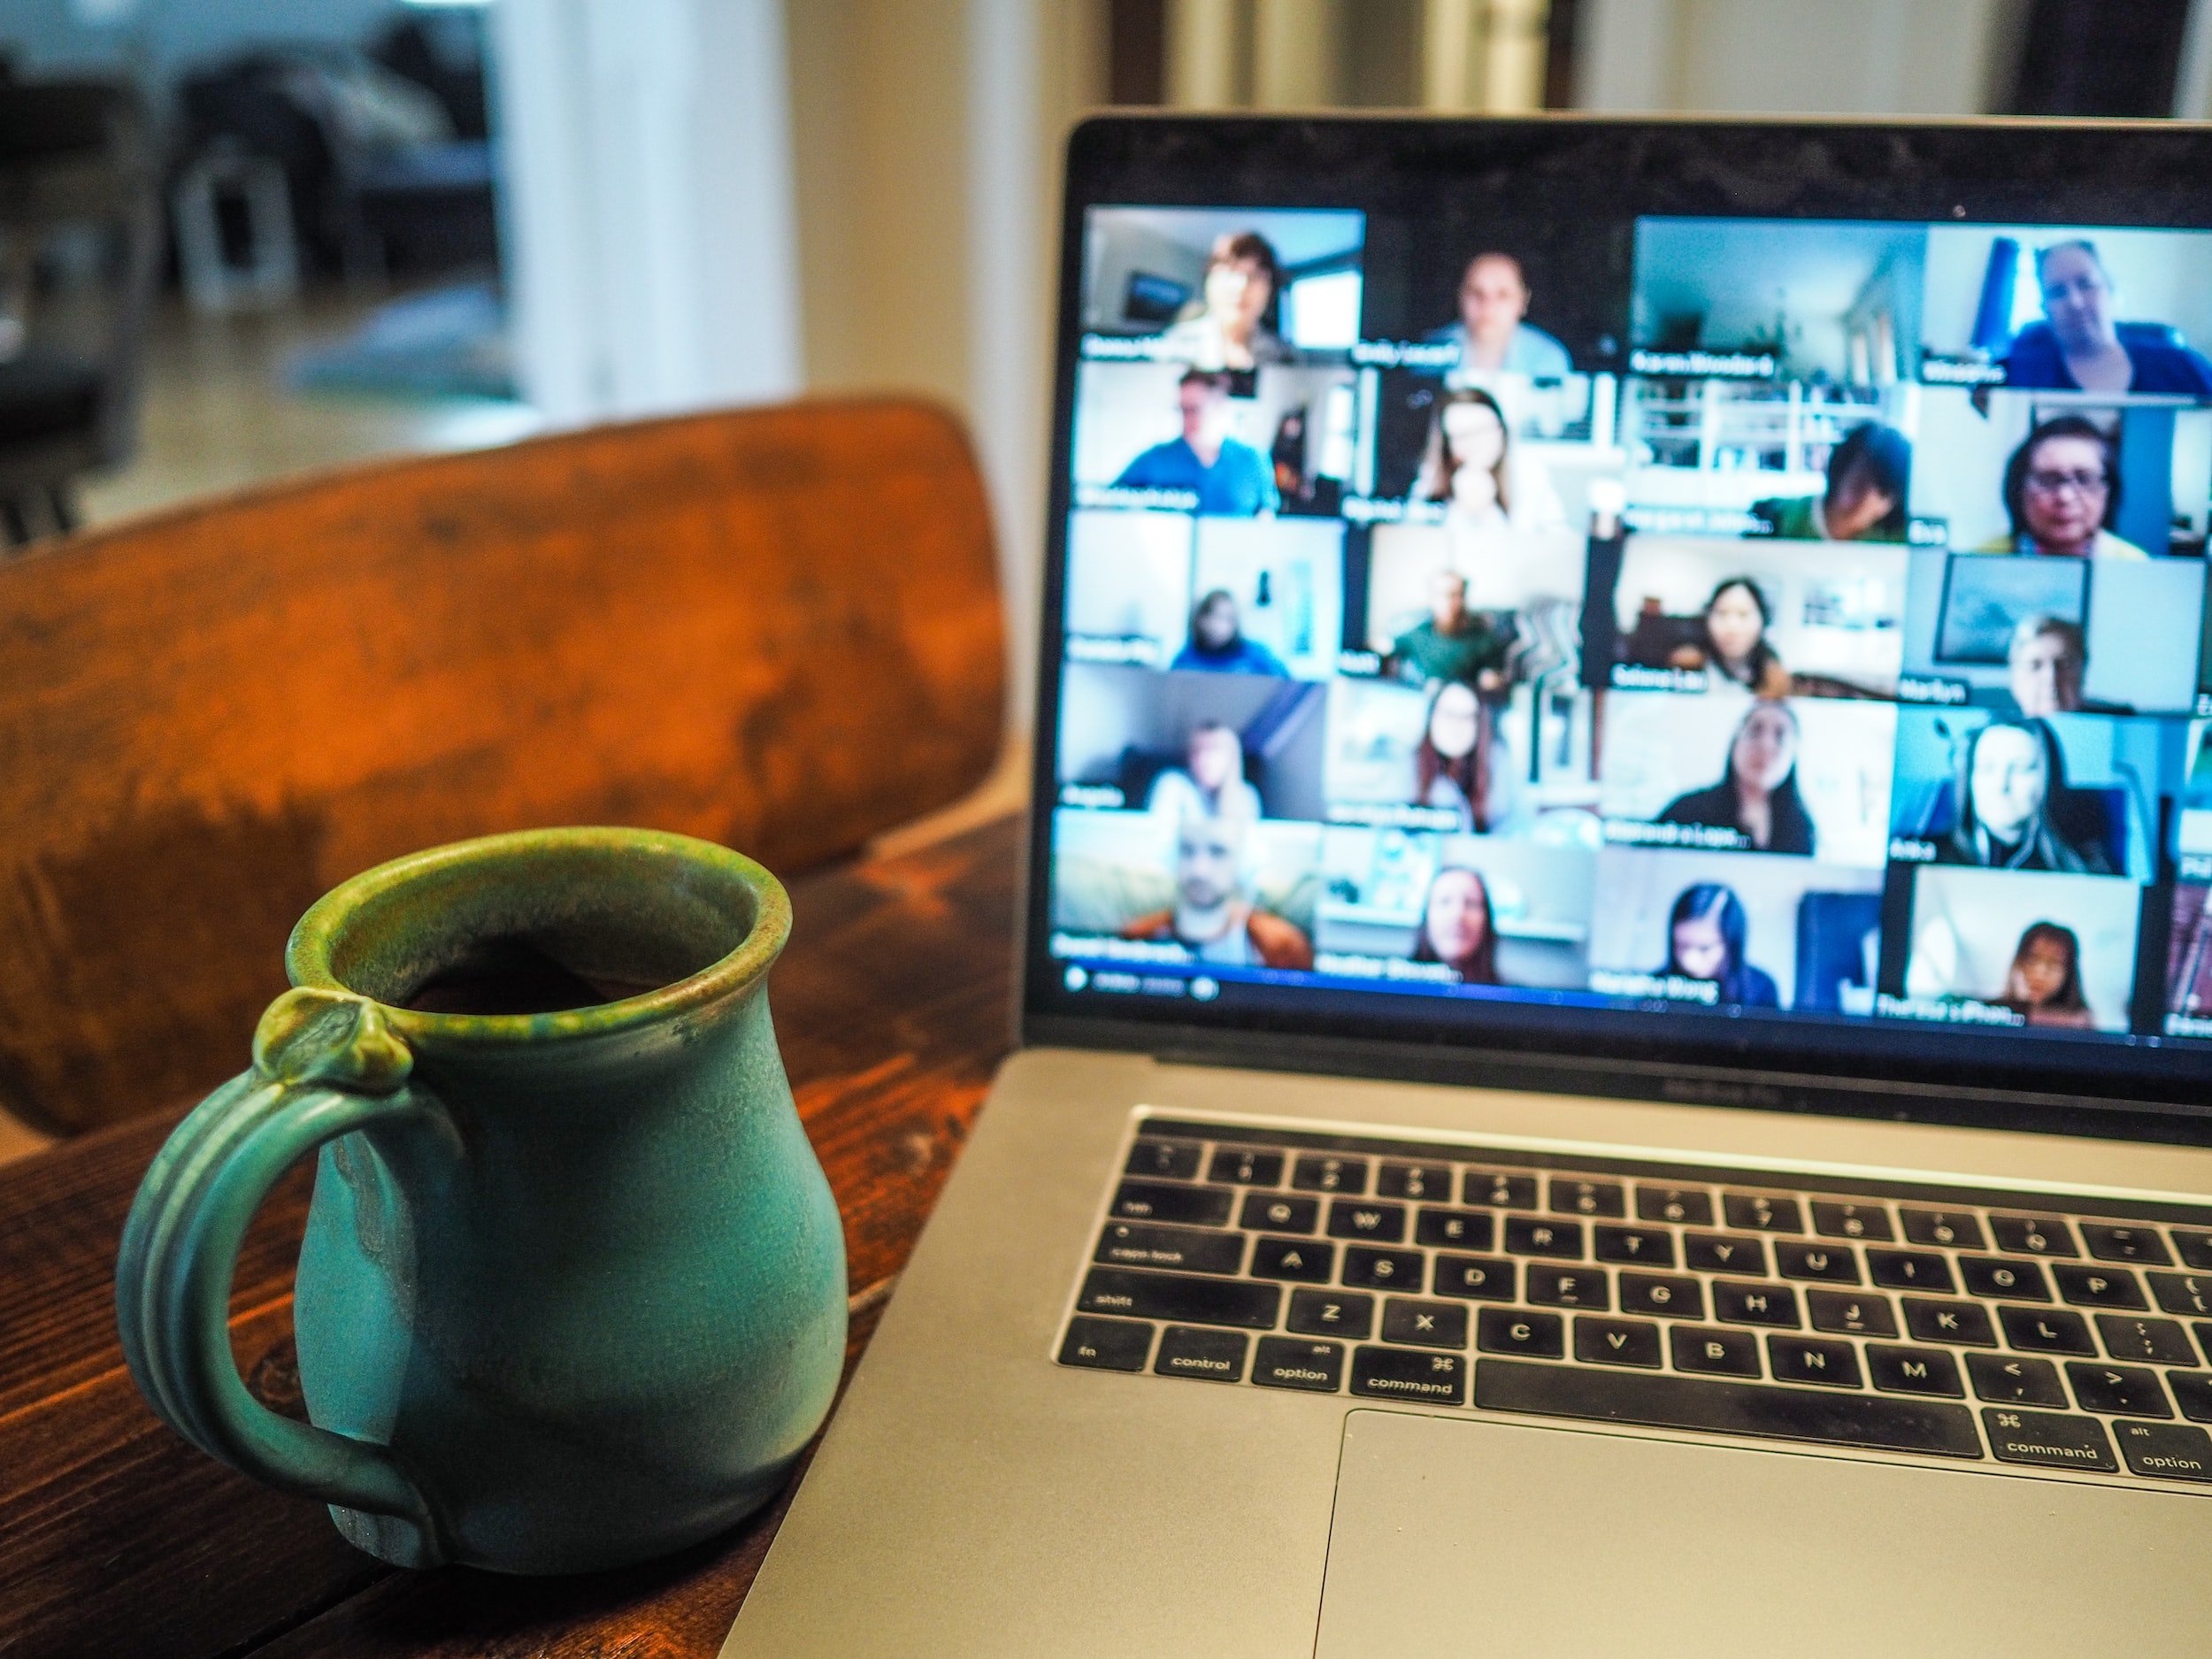 A coffee mug placed next to a laptop. Multiple participants of an online forum are displayed on the laptop screen.